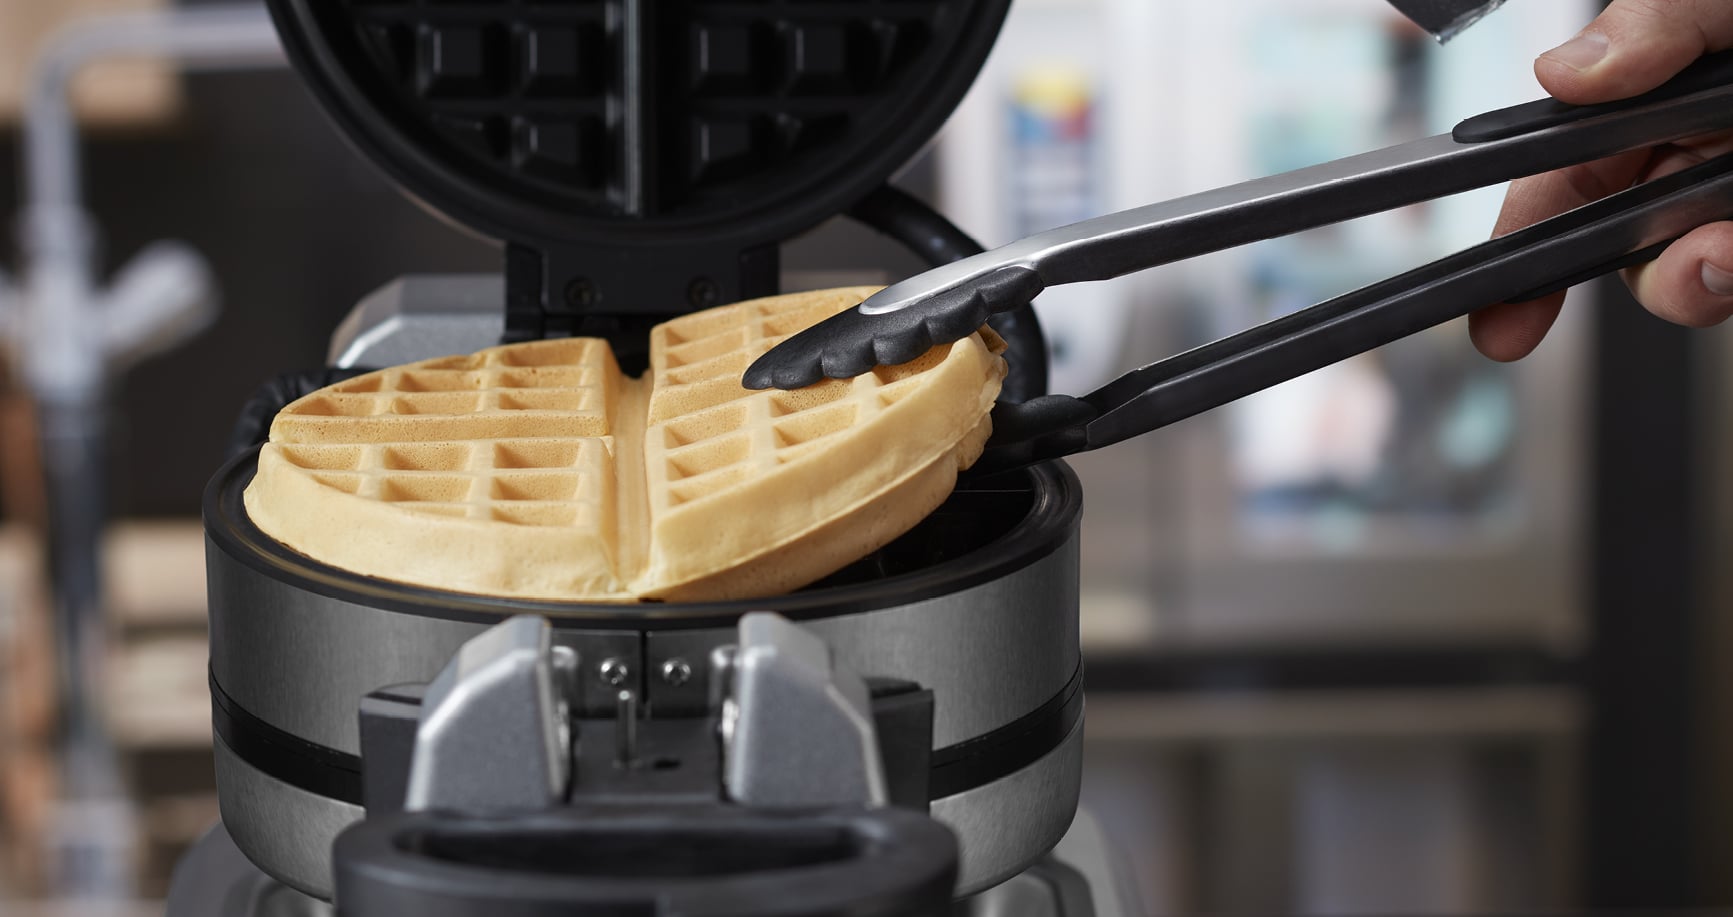 https://storables.com/wp-content/uploads/2023/08/15-best-waring-waffle-iron-for-2023-1693183841.jpeg